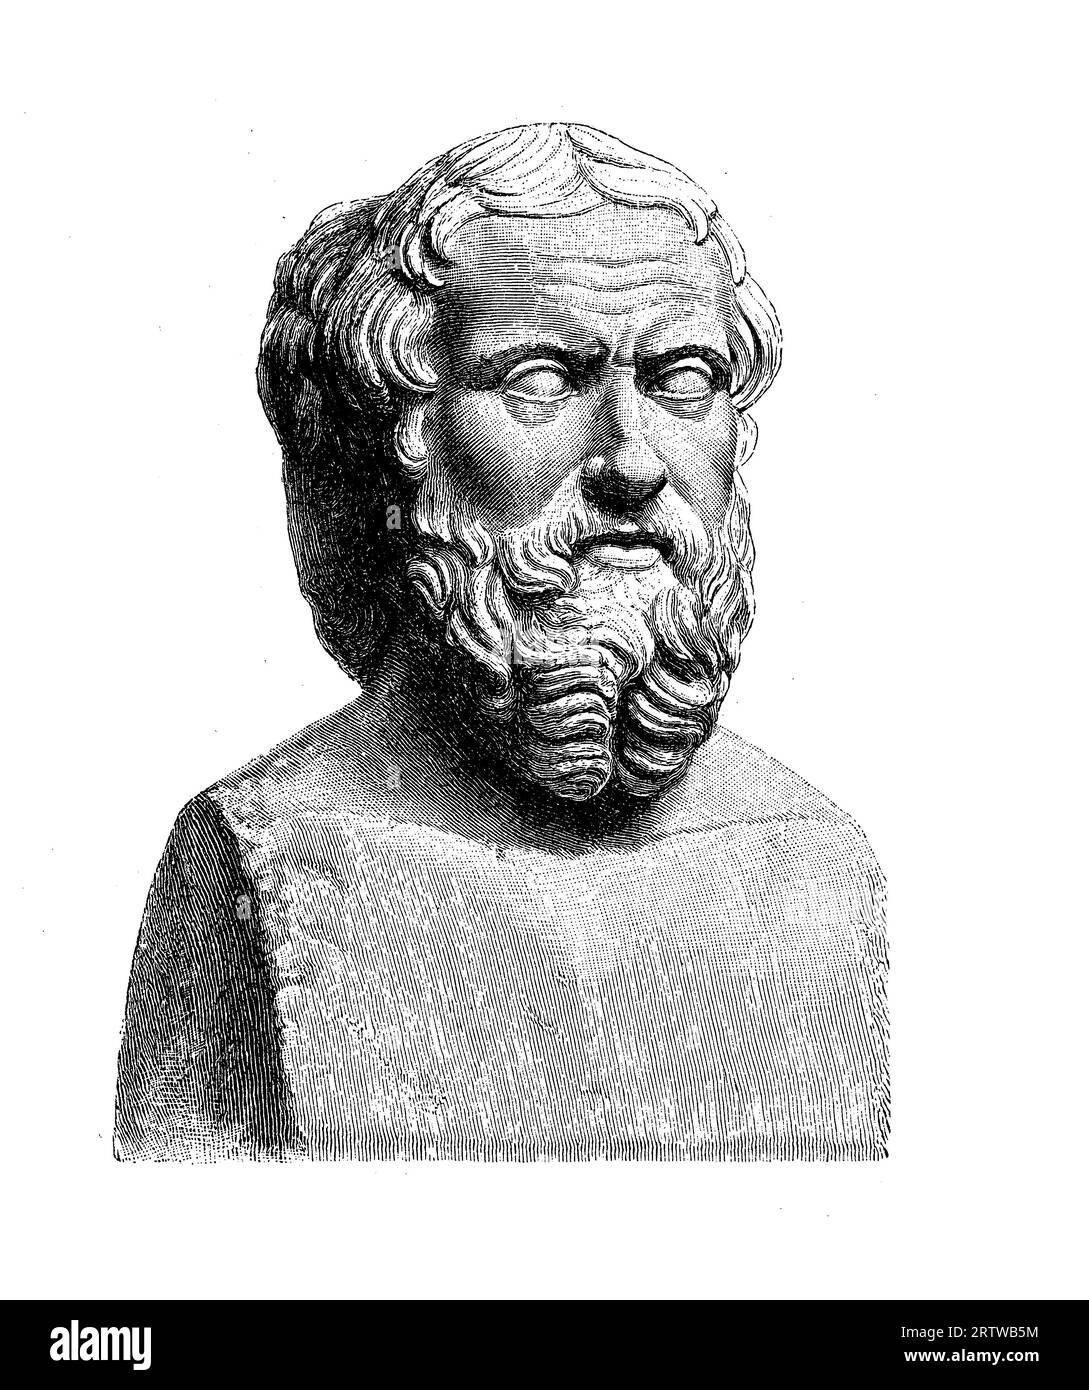 Herodotus (c. 484-425 BCE) ancient Greek historian who is often referred to as the 'Father of History.' Herodotus is known for his monumental work called 'The Histories' or 'The Persian Wars' Stock Photo